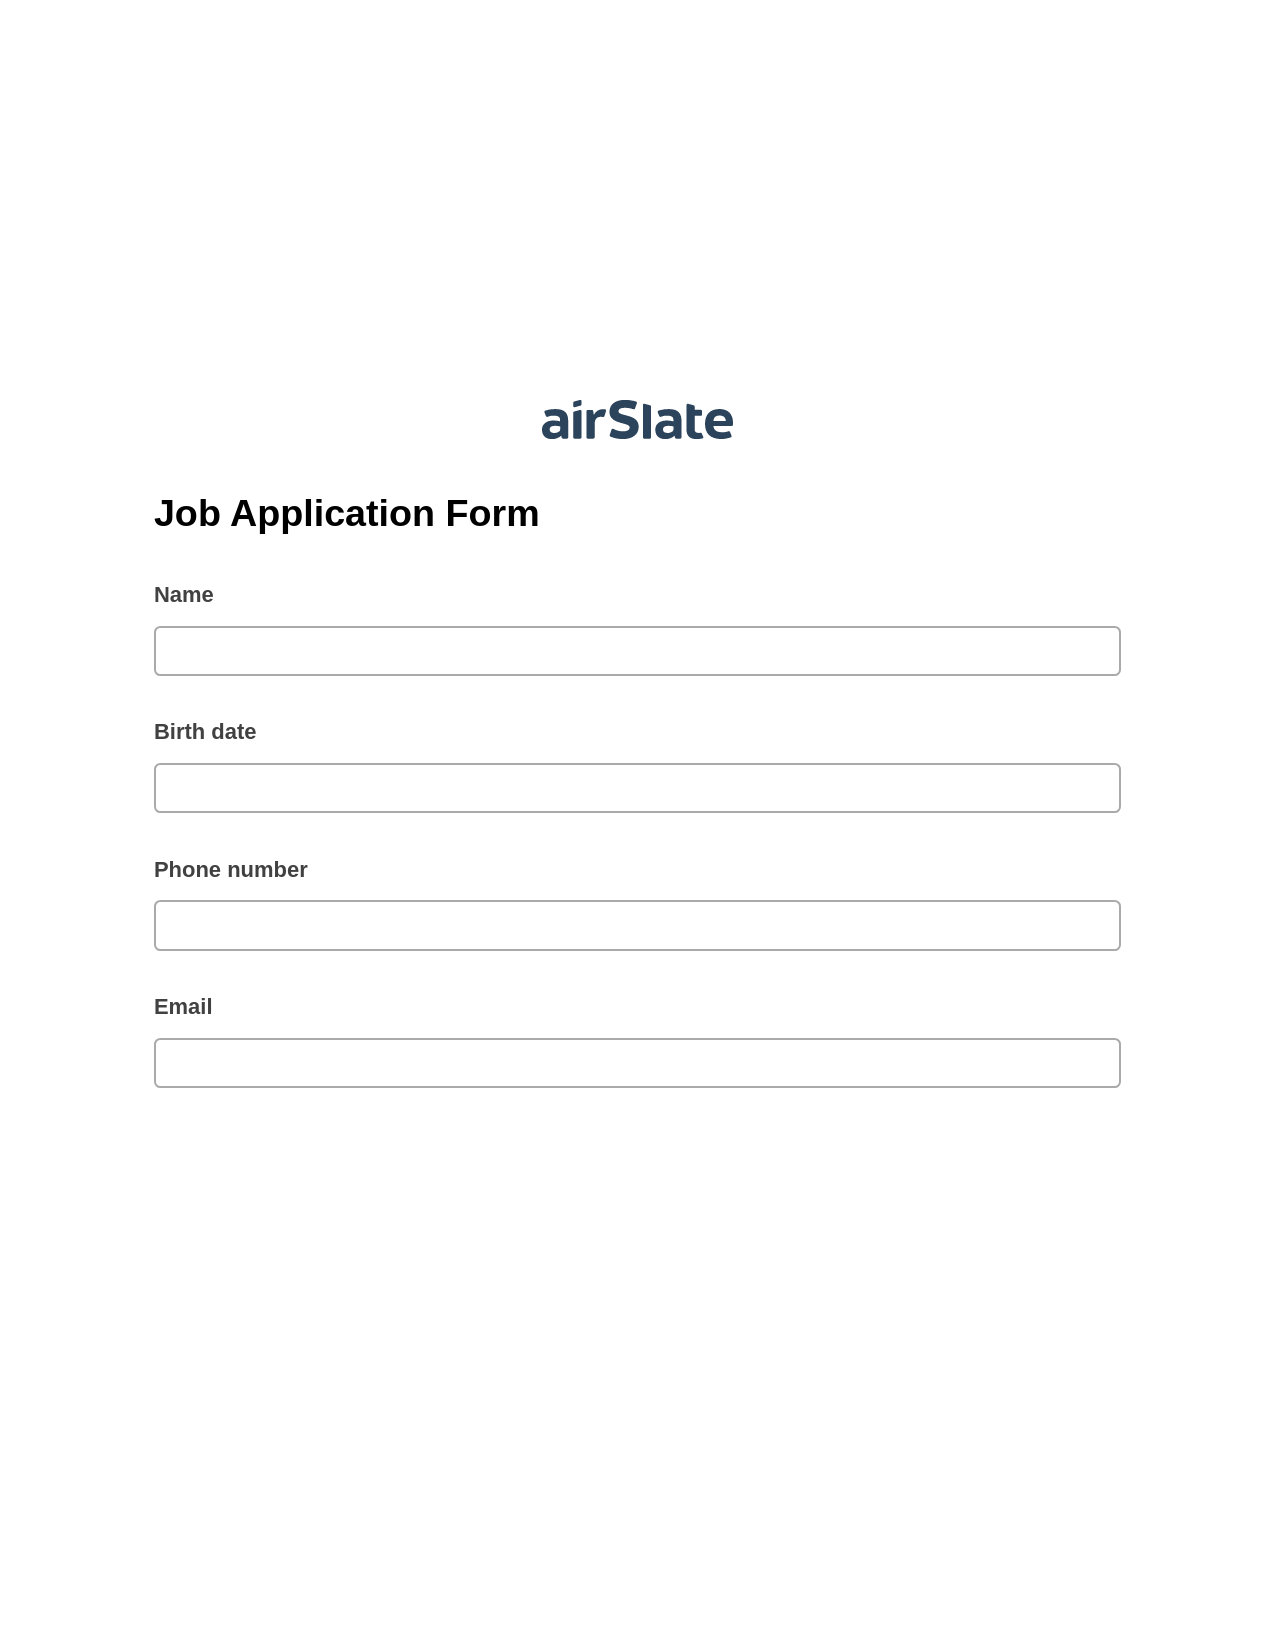 Job Application Form Pre-fill from Google Sheets Bot, Update NetSuite Records Bot, Export to Google Sheet Bot